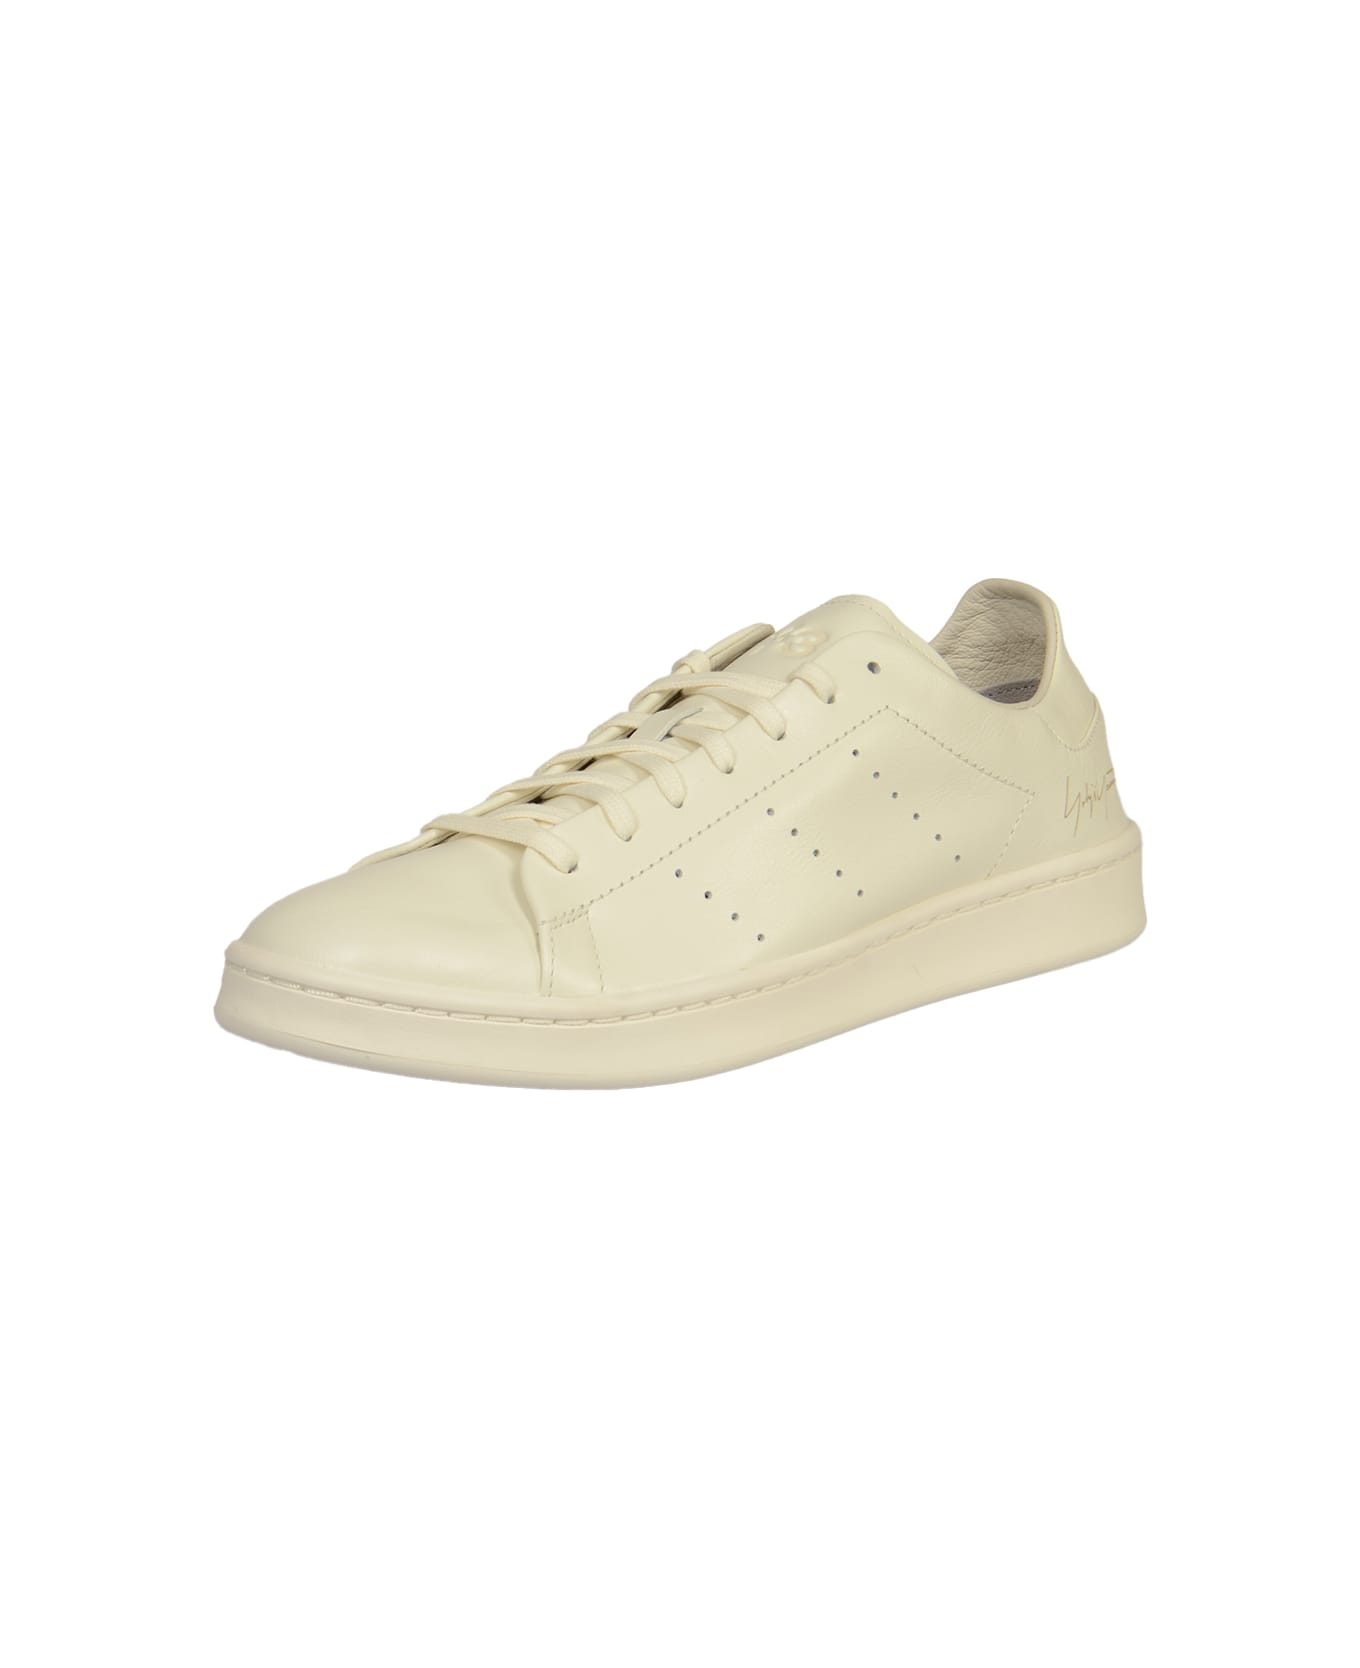 Y-3 Stan Smith Sneakers - Off White スニーカー